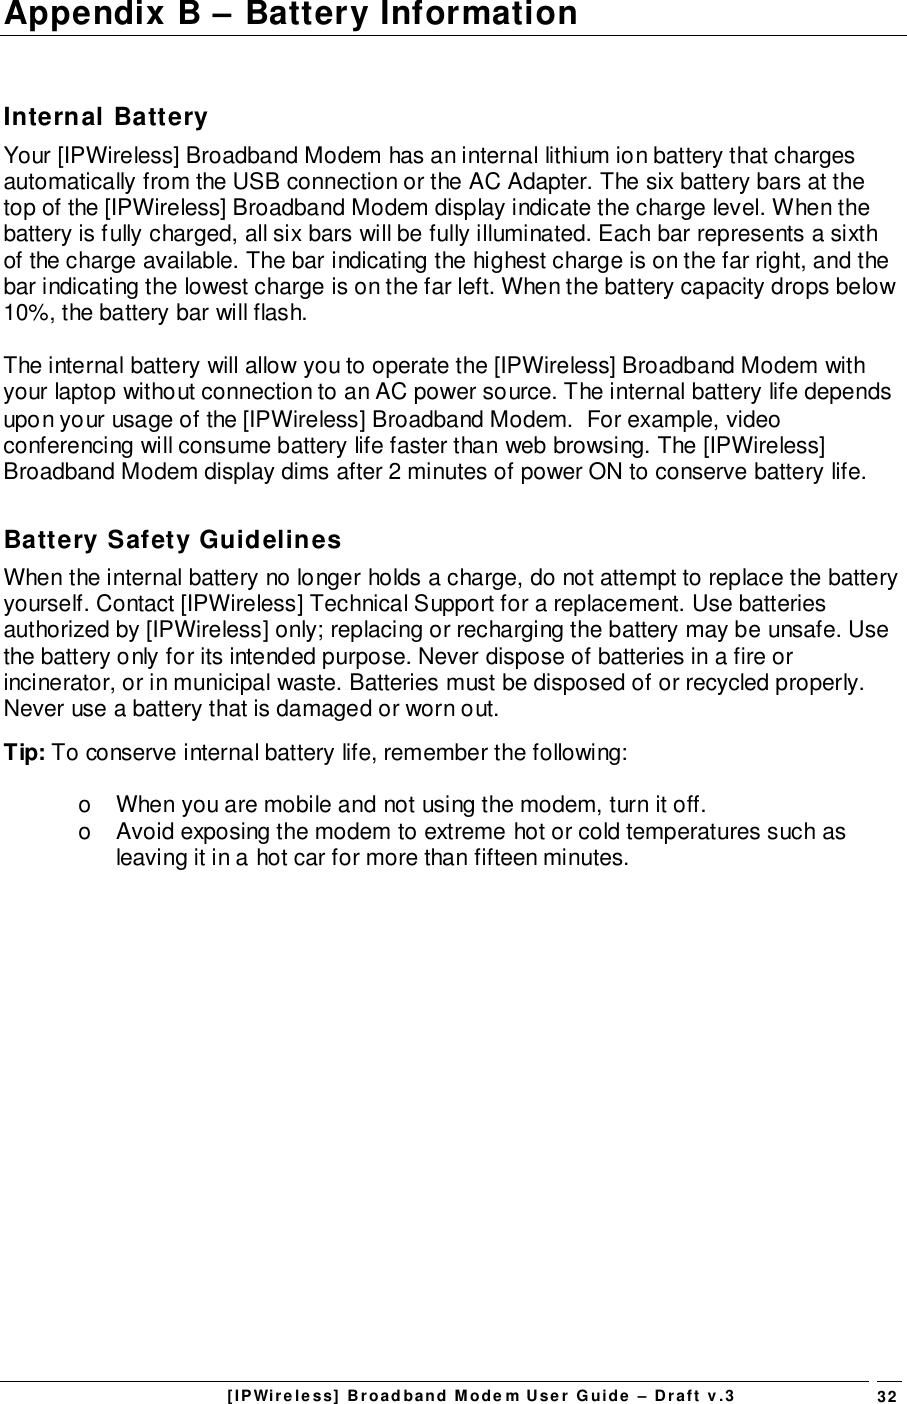 [IPWireless] Broadband Modem User Guide – Draft v.3 32Appendix B – Battery InformationInternal BatteryYour [IPWireless] Broadband Modem has an internal lithium ion battery that chargesautomatically from the USB connection or the AC Adapter. The six battery bars at thetop of the [IPWireless] Broadband Modem display indicate the charge level. When thebattery is fully charged, all six bars will be fully illuminated. Each bar represents a sixthof the charge available. The bar indicating the highest charge is on the far right, and thebar indicating the lowest charge is on the far left. When the battery capacity drops below10%, the battery bar will flash.The internal battery will allow you to operate the [IPWireless] Broadband Modem withyour laptop without connection to an AC power source. The internal battery life dependsupon your usage of the [IPWireless] Broadband Modem.  For example, videoconferencing will consume battery life faster than web browsing. The [IPWireless]Broadband Modem display dims after 2 minutes of power ON to conserve battery life.Battery Safety GuidelinesWhen the internal battery no longer holds a charge, do not attempt to replace the batteryyourself. Contact [IPWireless] Technical Support for a replacement. Use batteriesauthorized by [IPWireless] only; replacing or recharging the battery may be unsafe. Usethe battery only for its intended purpose. Never dispose of batteries in a fire orincinerator, or in municipal waste. Batteries must be disposed of or recycled properly.Never use a battery that is damaged or worn out.Tip: To conserve internal battery life, remember the following:o  When you are mobile and not using the modem, turn it off.o  Avoid exposing the modem to extreme hot or cold temperatures such asleaving it in a hot car for more than fifteen minutes.